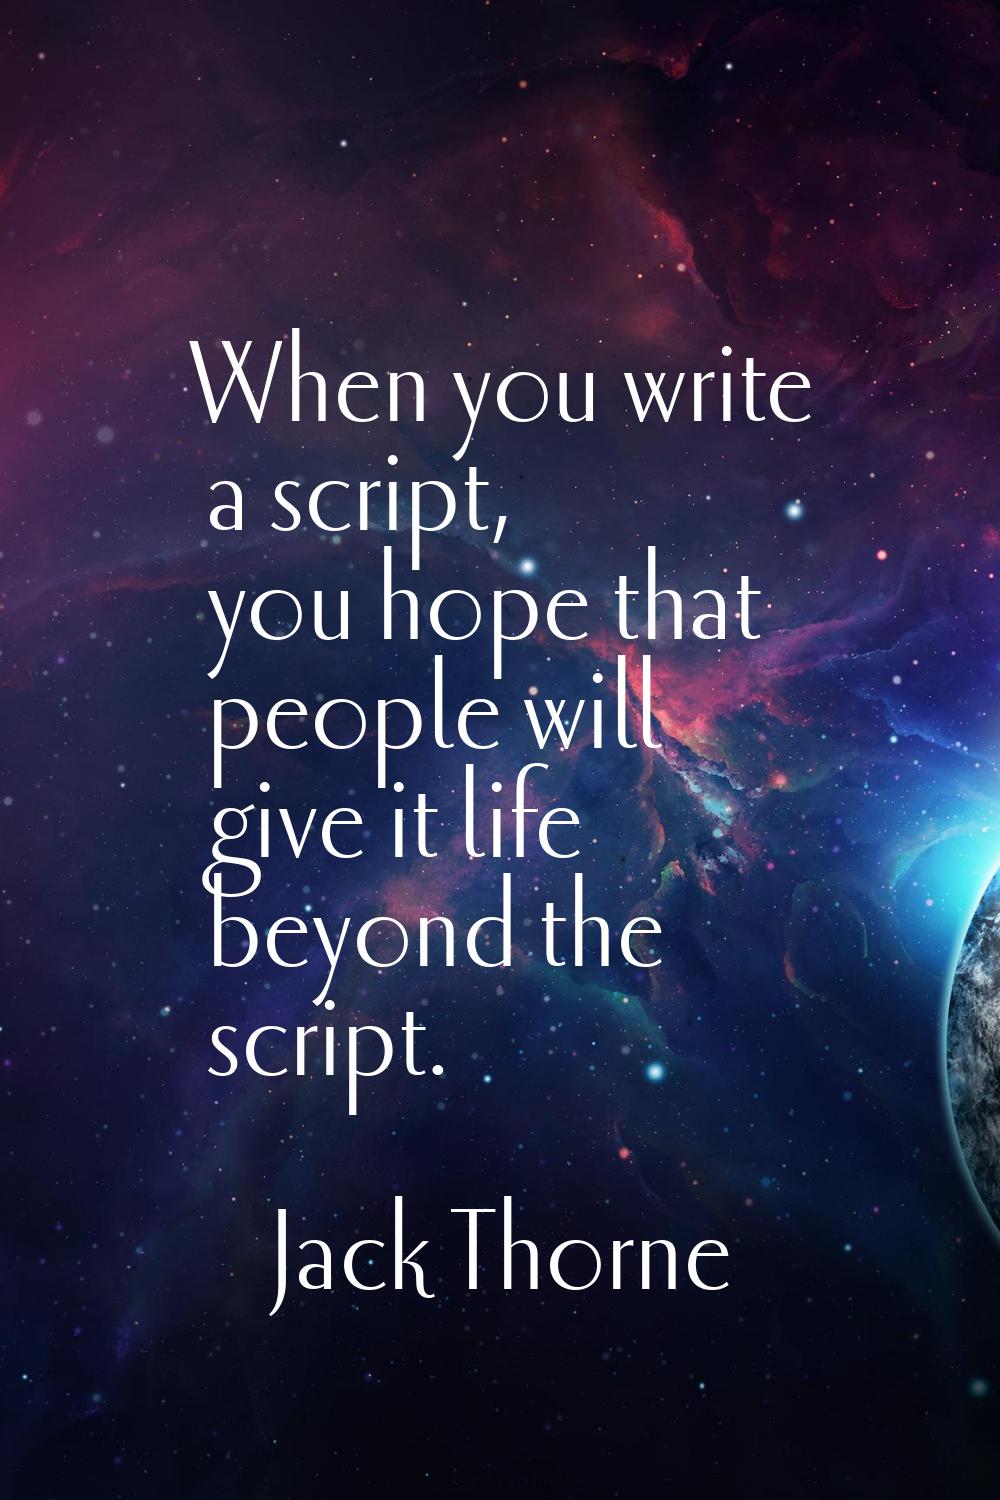 When you write a script, you hope that people will give it life beyond the script.